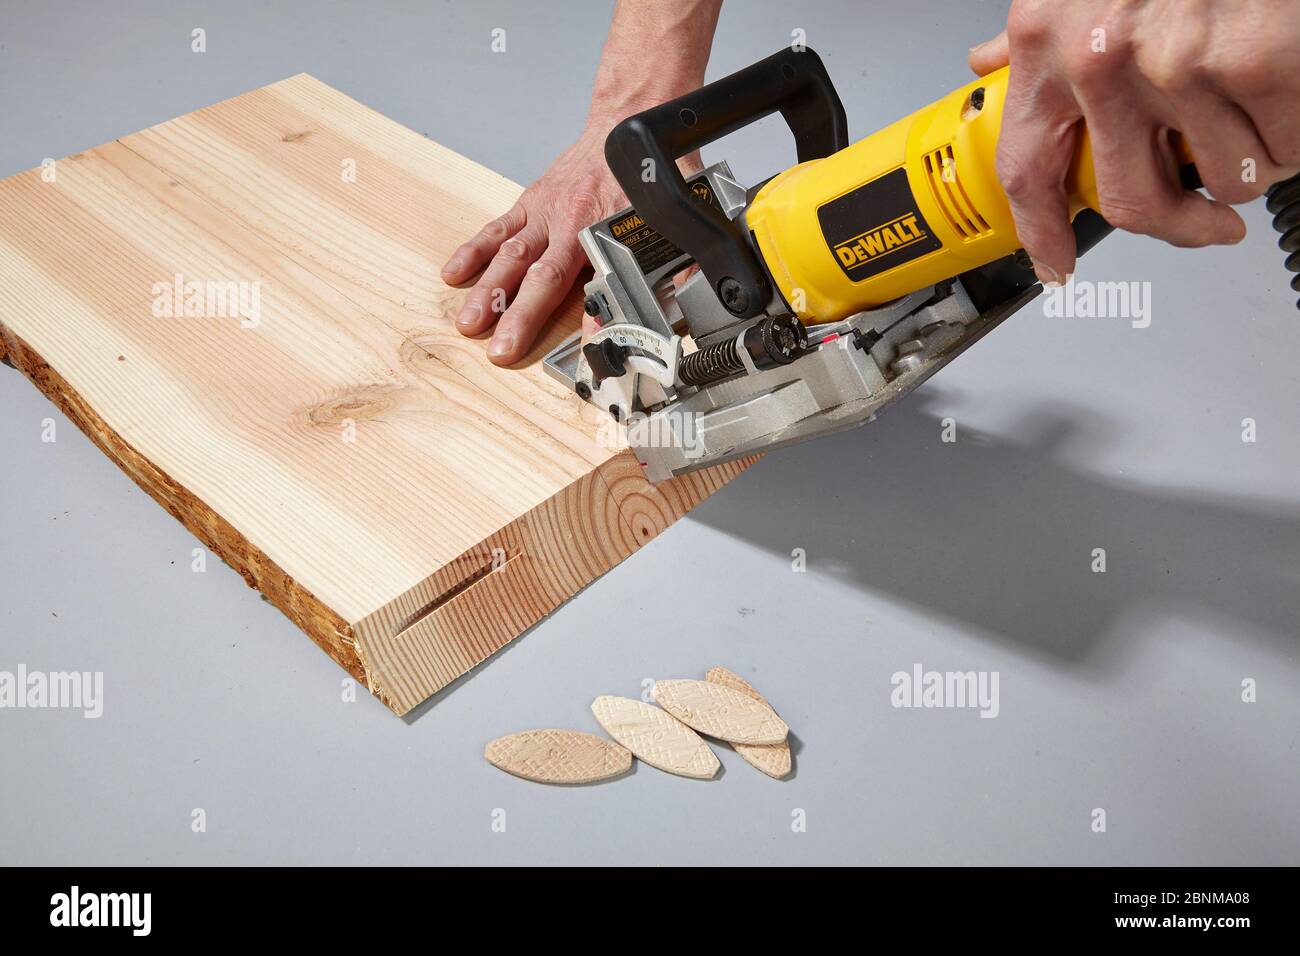 Construction of a shelf made of wood, do-it-yourself production, step-by-step, step 5 milling the grooves for the lamello dowels with the flat dowel router Stock Photo